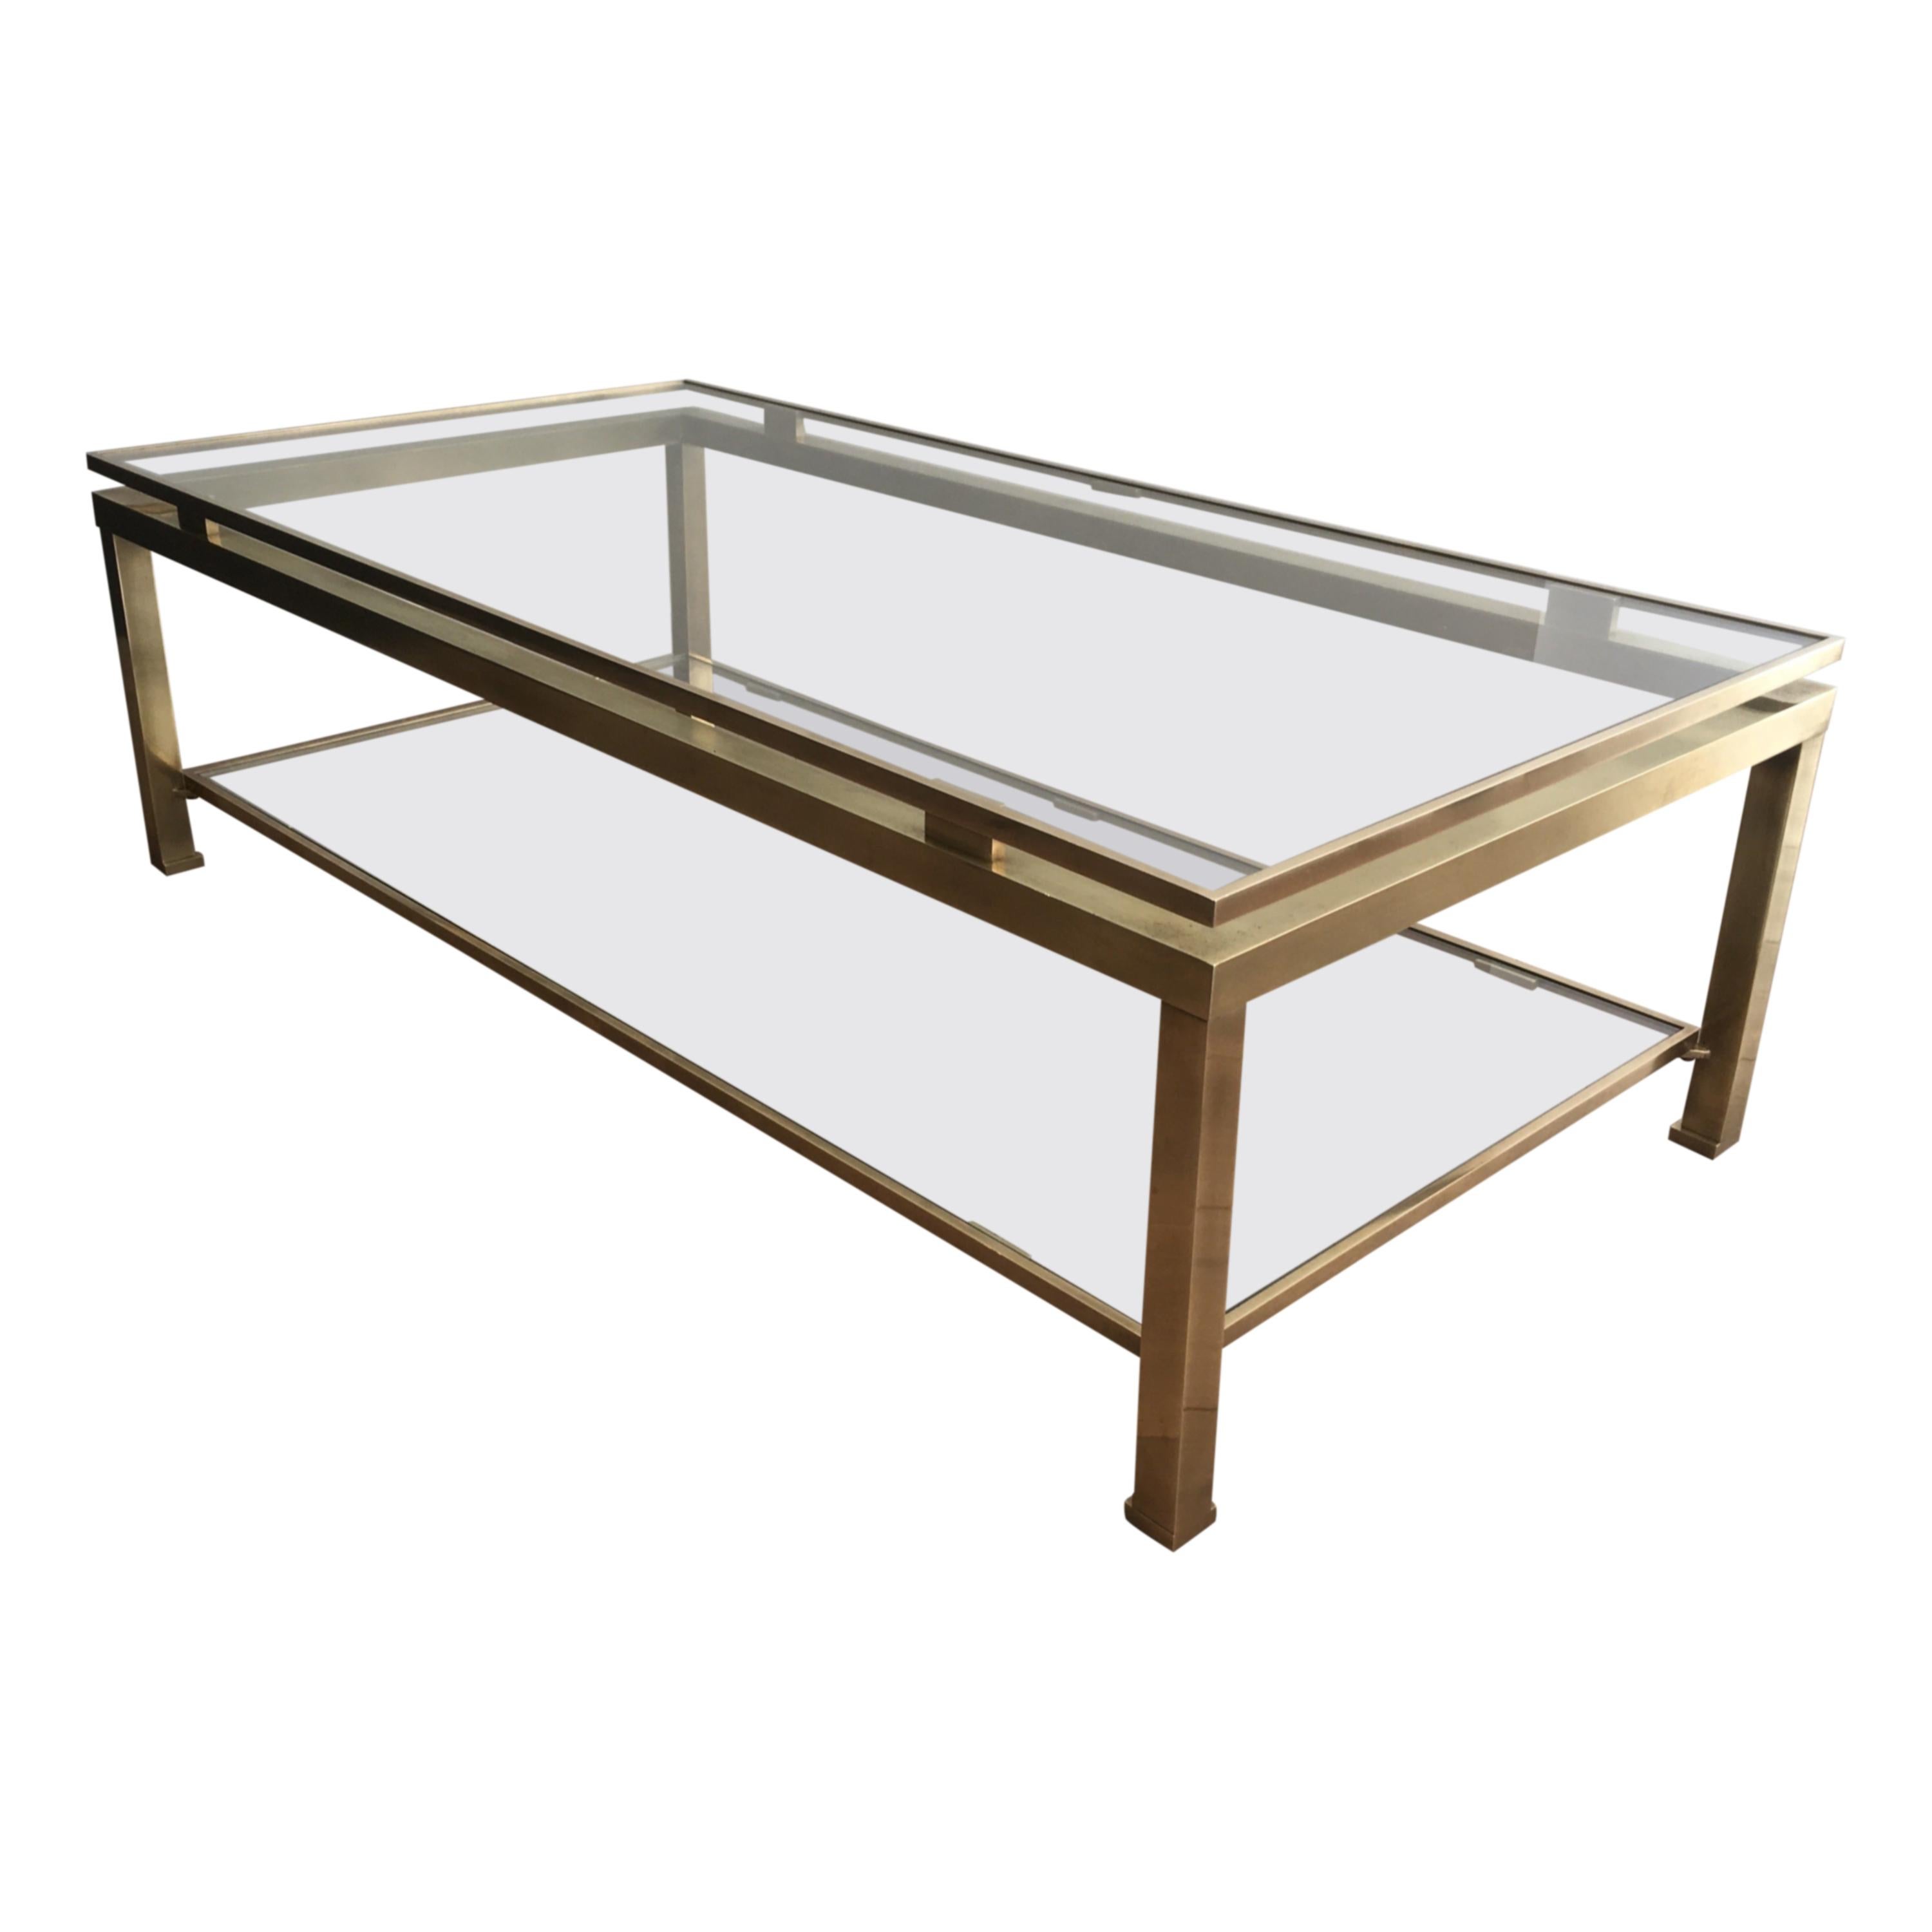 Guy Lefèvre for Maison Jansen, Brass Coffee Table with 2 Glass Shelves